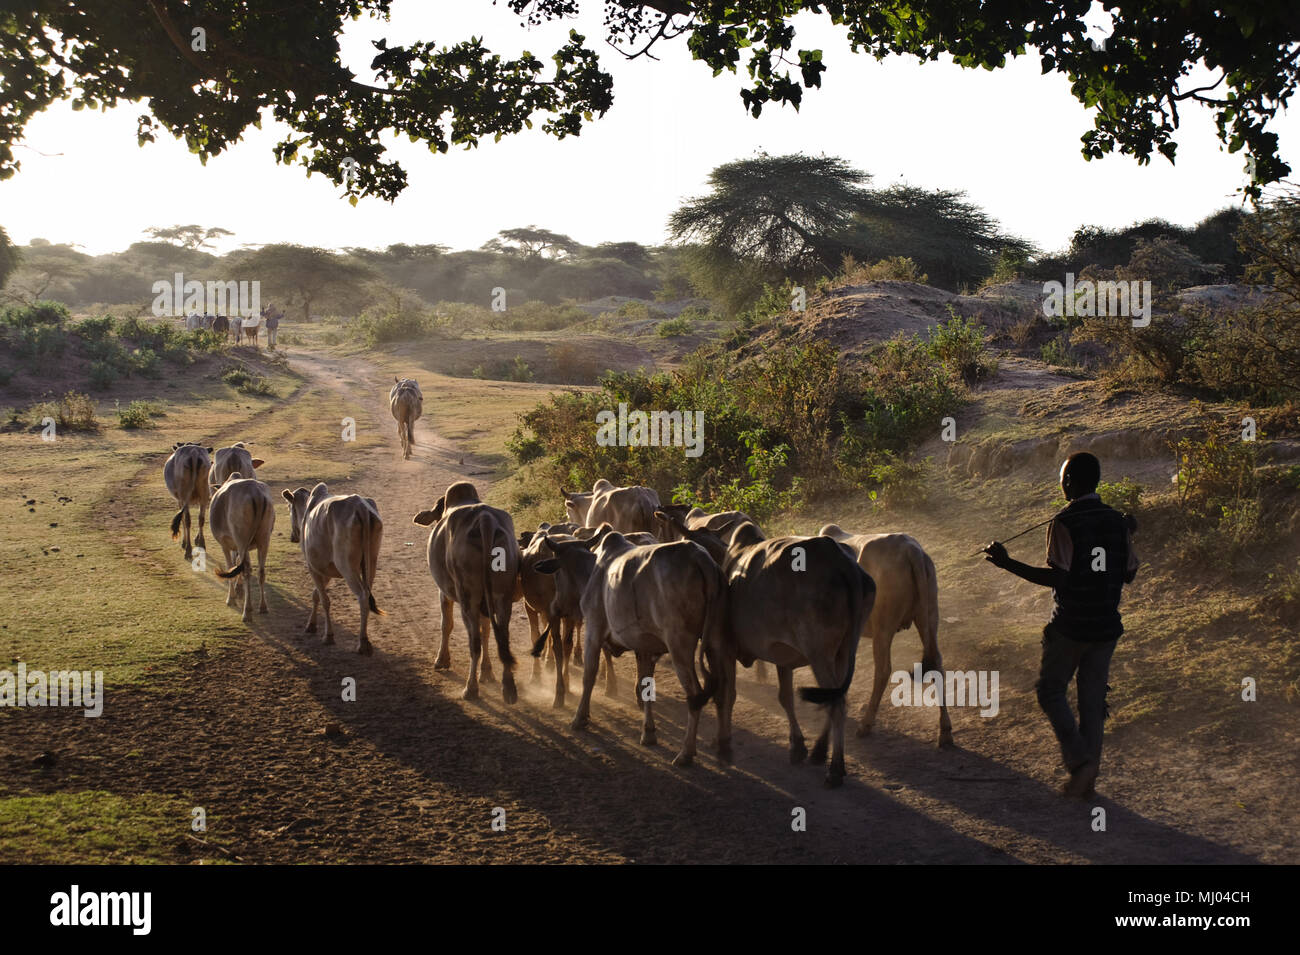 Cattle going to graze in a dry region ( Ethiopia) Stock Photo